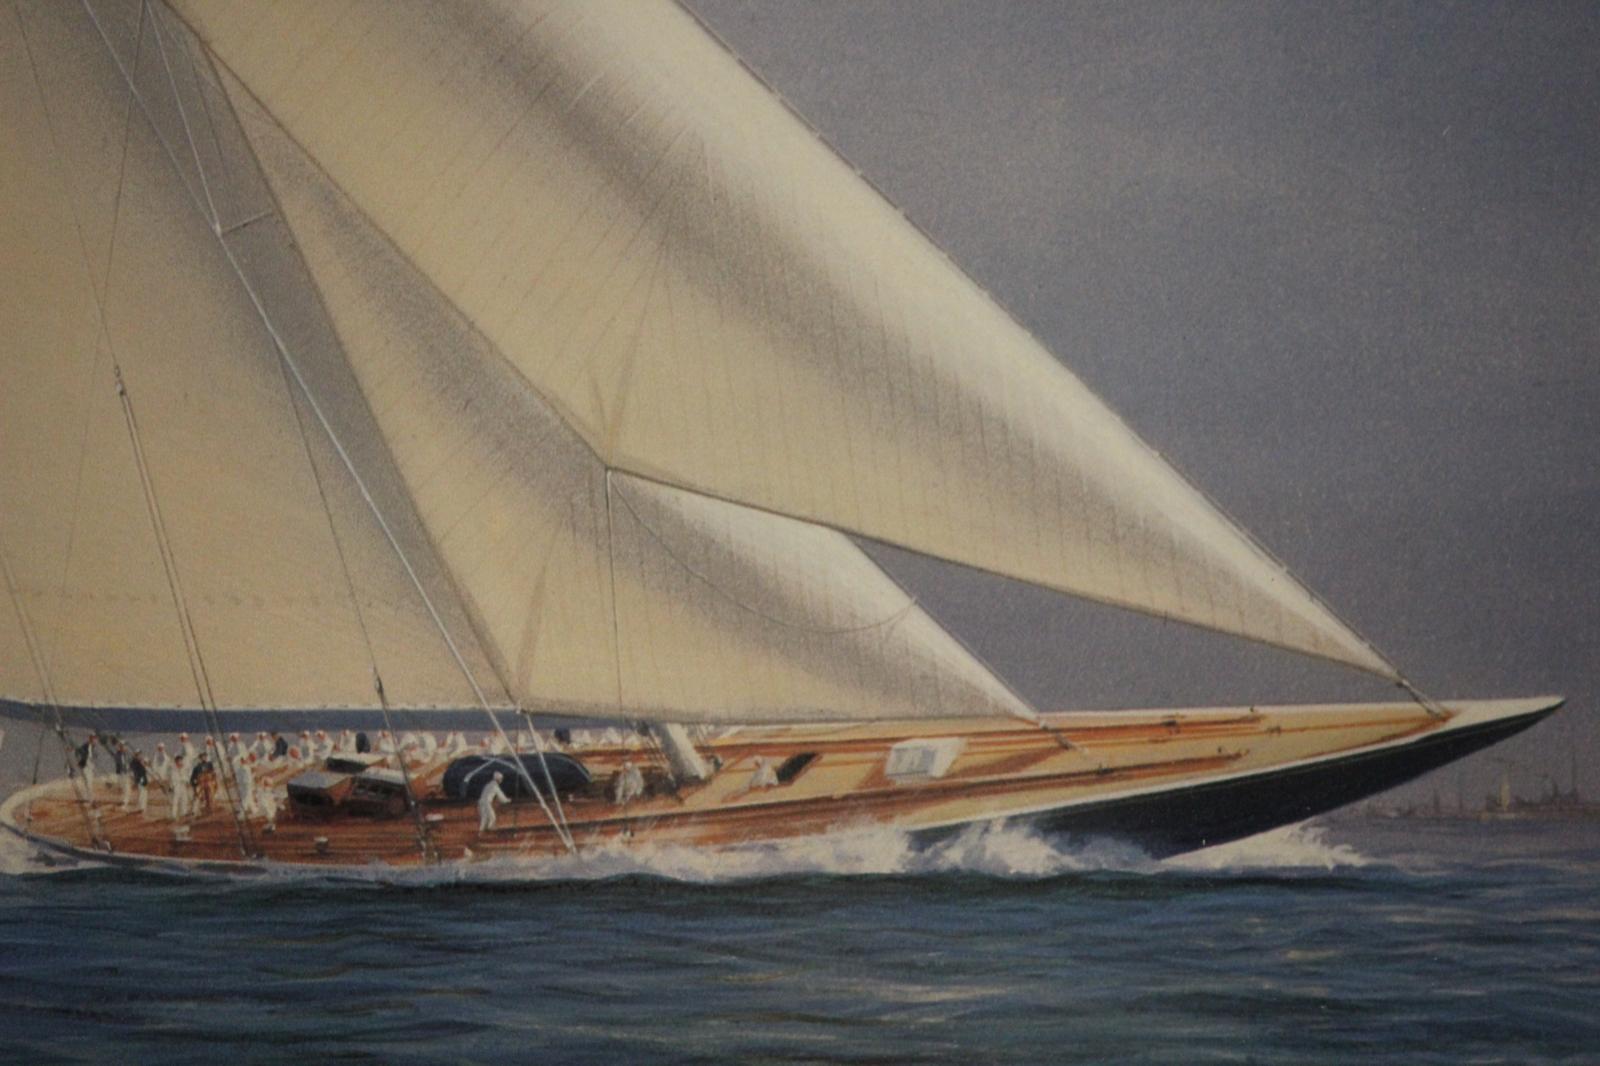 Yachts Of The America's Cup The 'J' Class 1992 Gerahmter Druck im Angebot 6